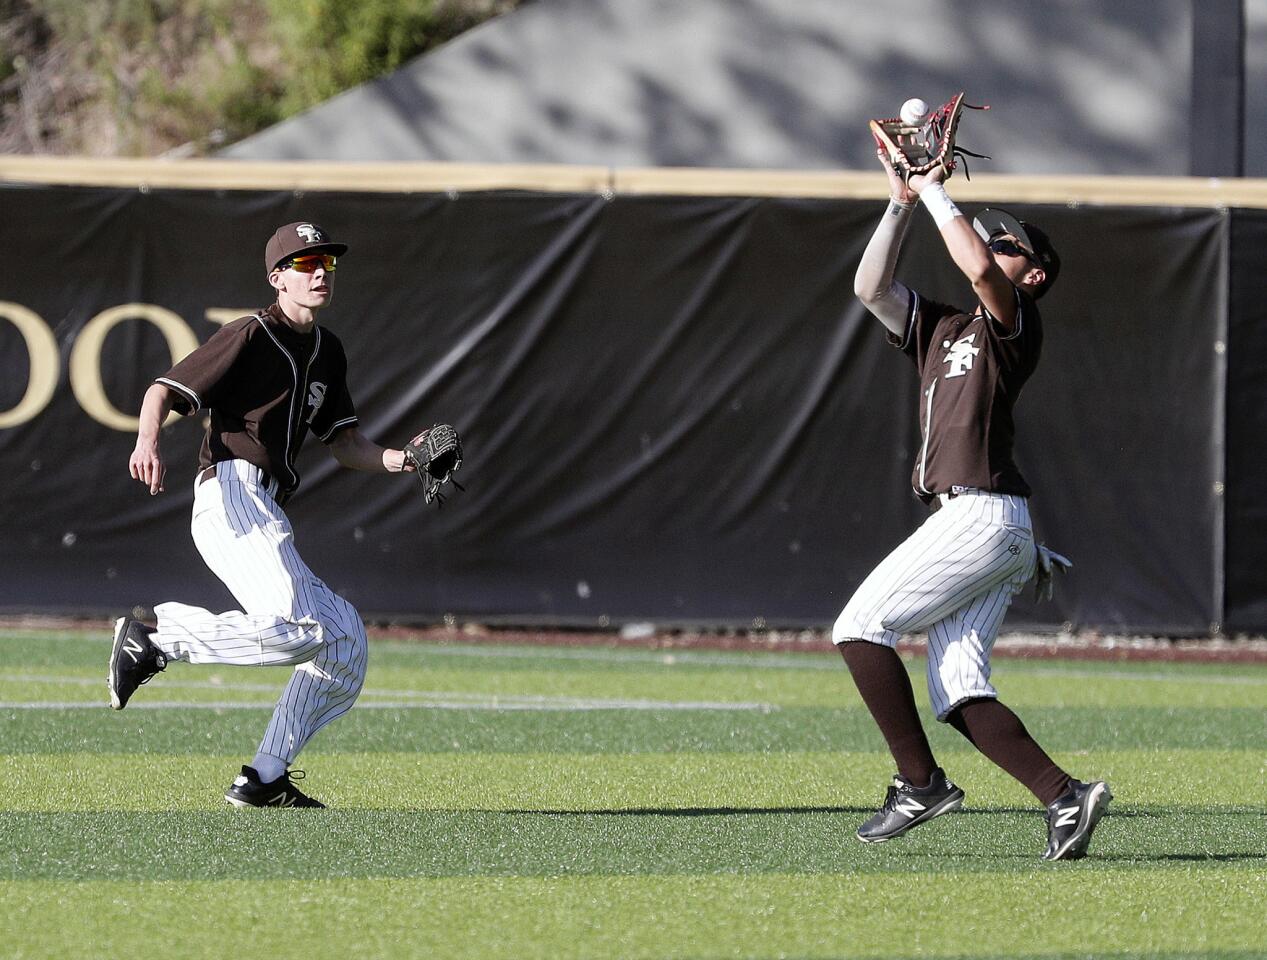 St. Francis' Jack Clougherty makes a game winning catch in center field as he and teammate Luke Crawshaw converge on the high fly ball hit by Alemany in a Mission League baseball game at the Glendale Sports Complex in Glendale on Monday, April 15, 2019. St. Francis won the game 6-4.